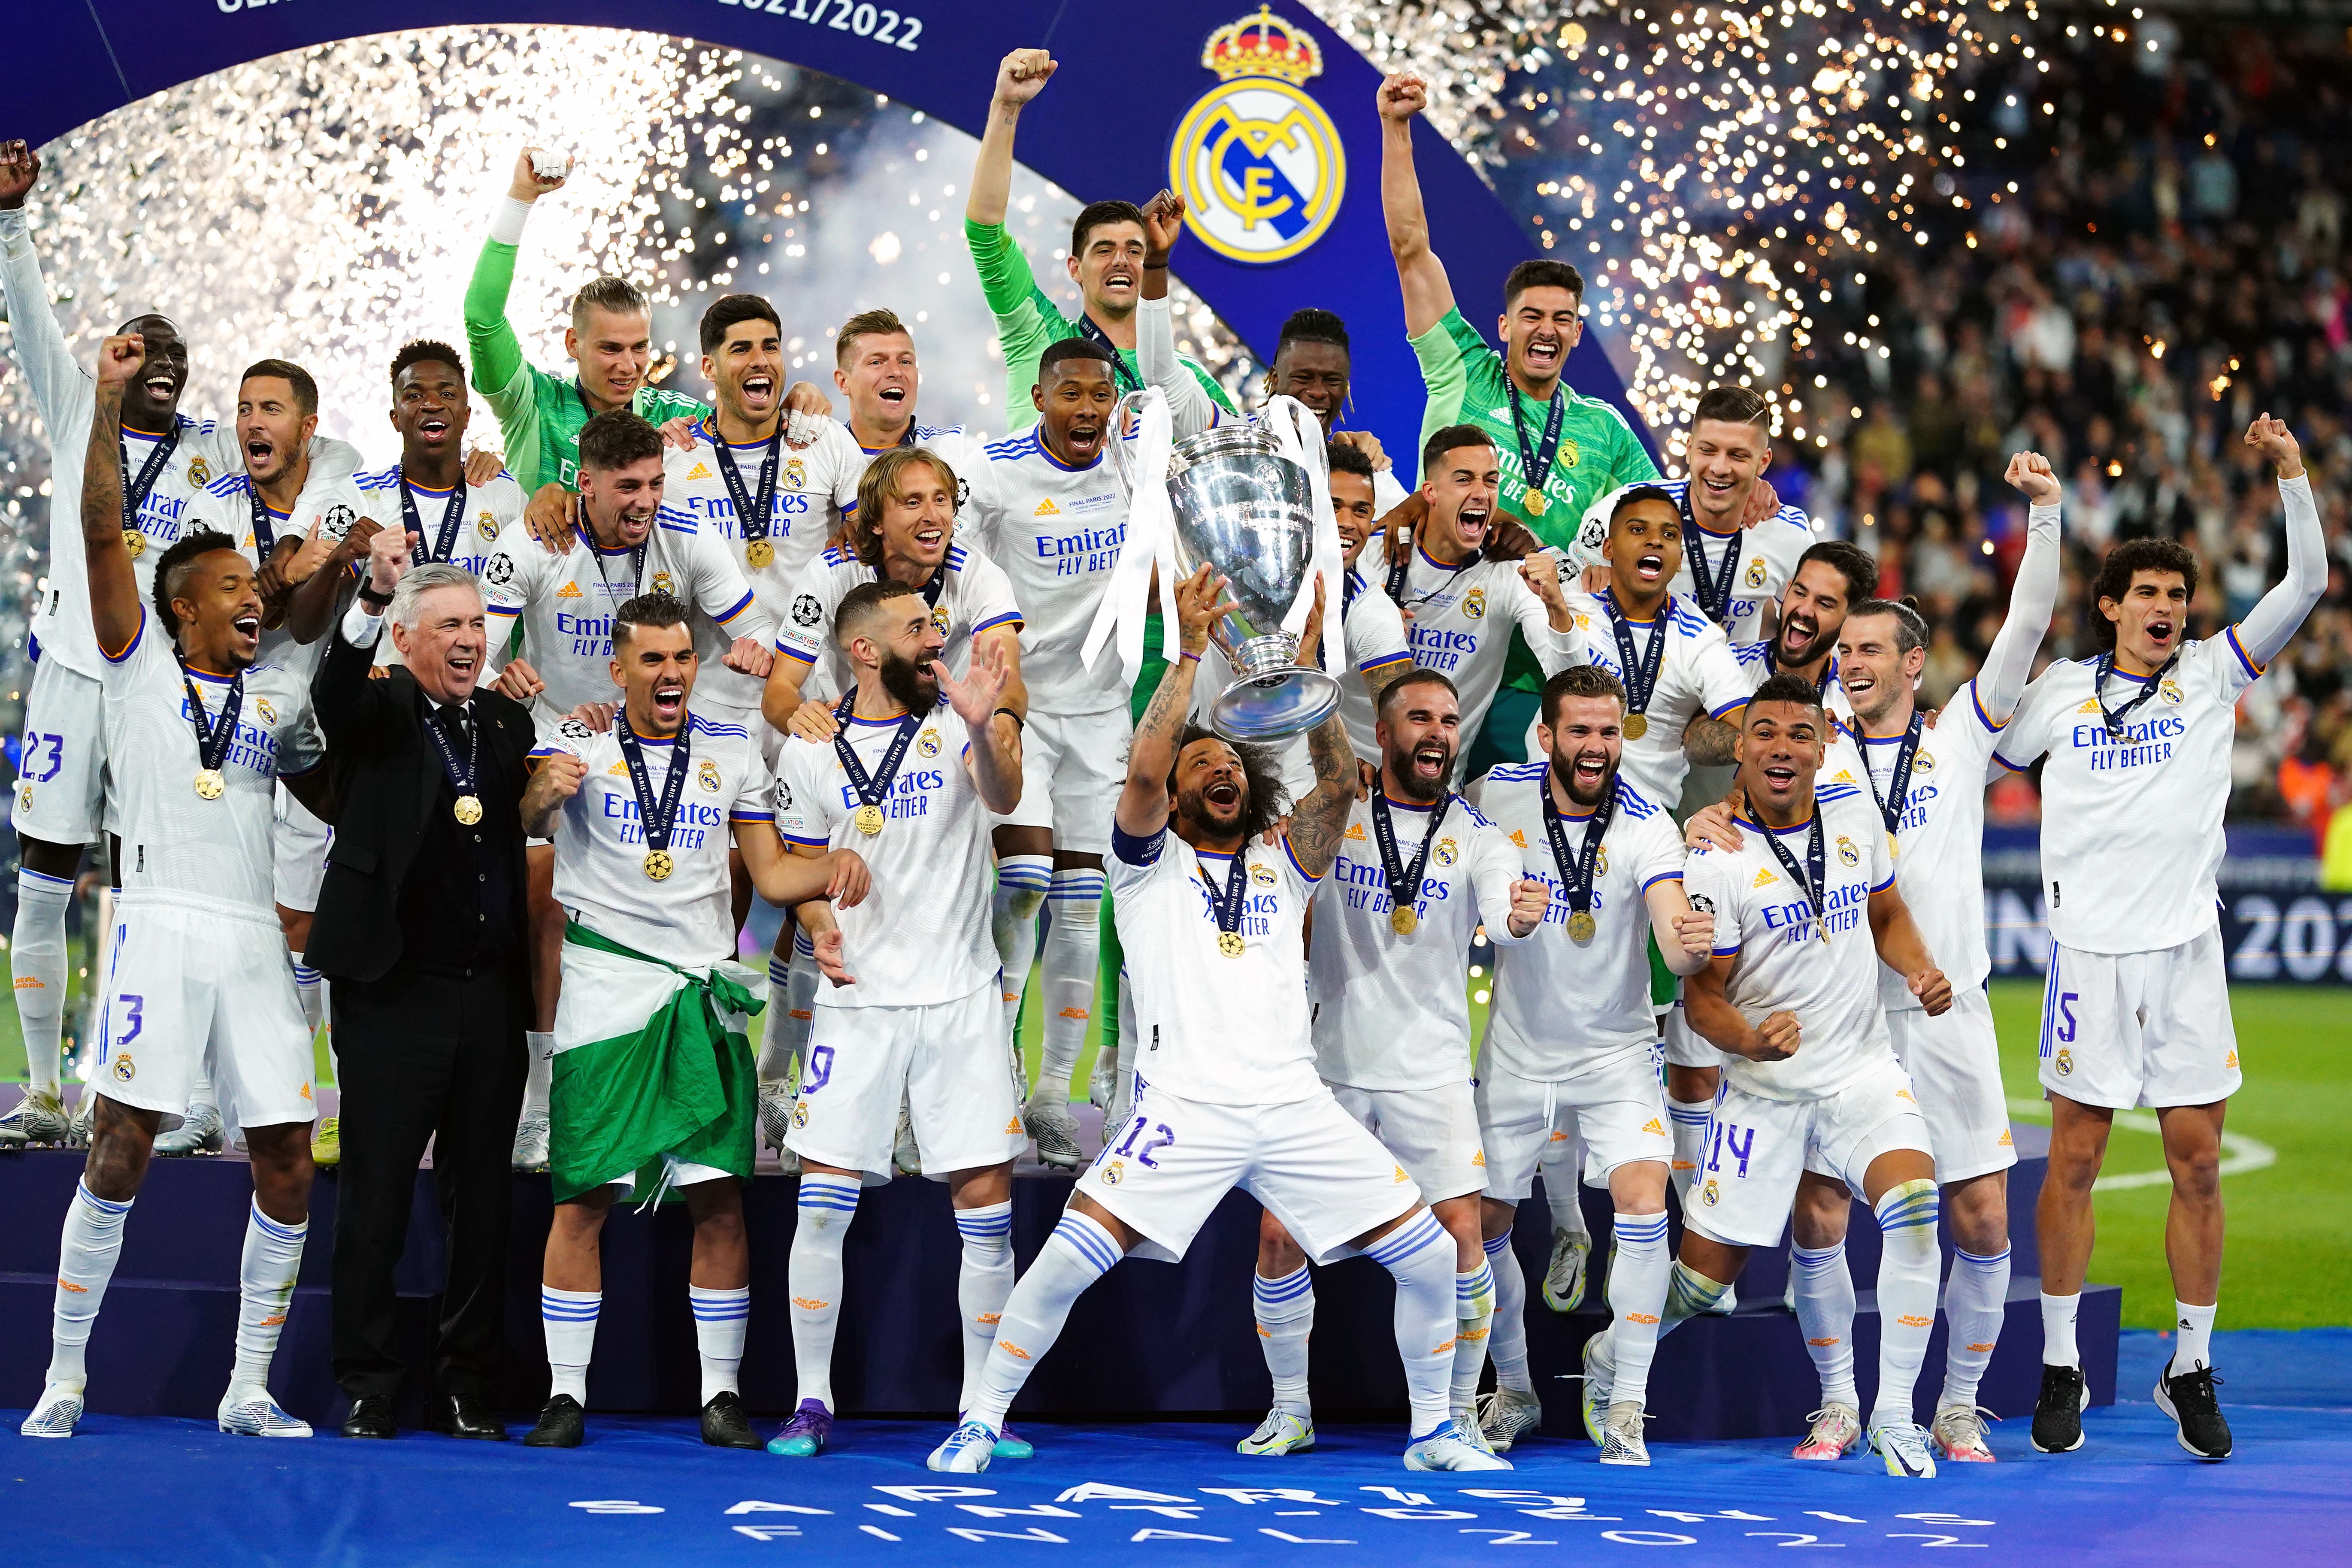 Real Madrid are unbeaten in the Champions League finals since 1981